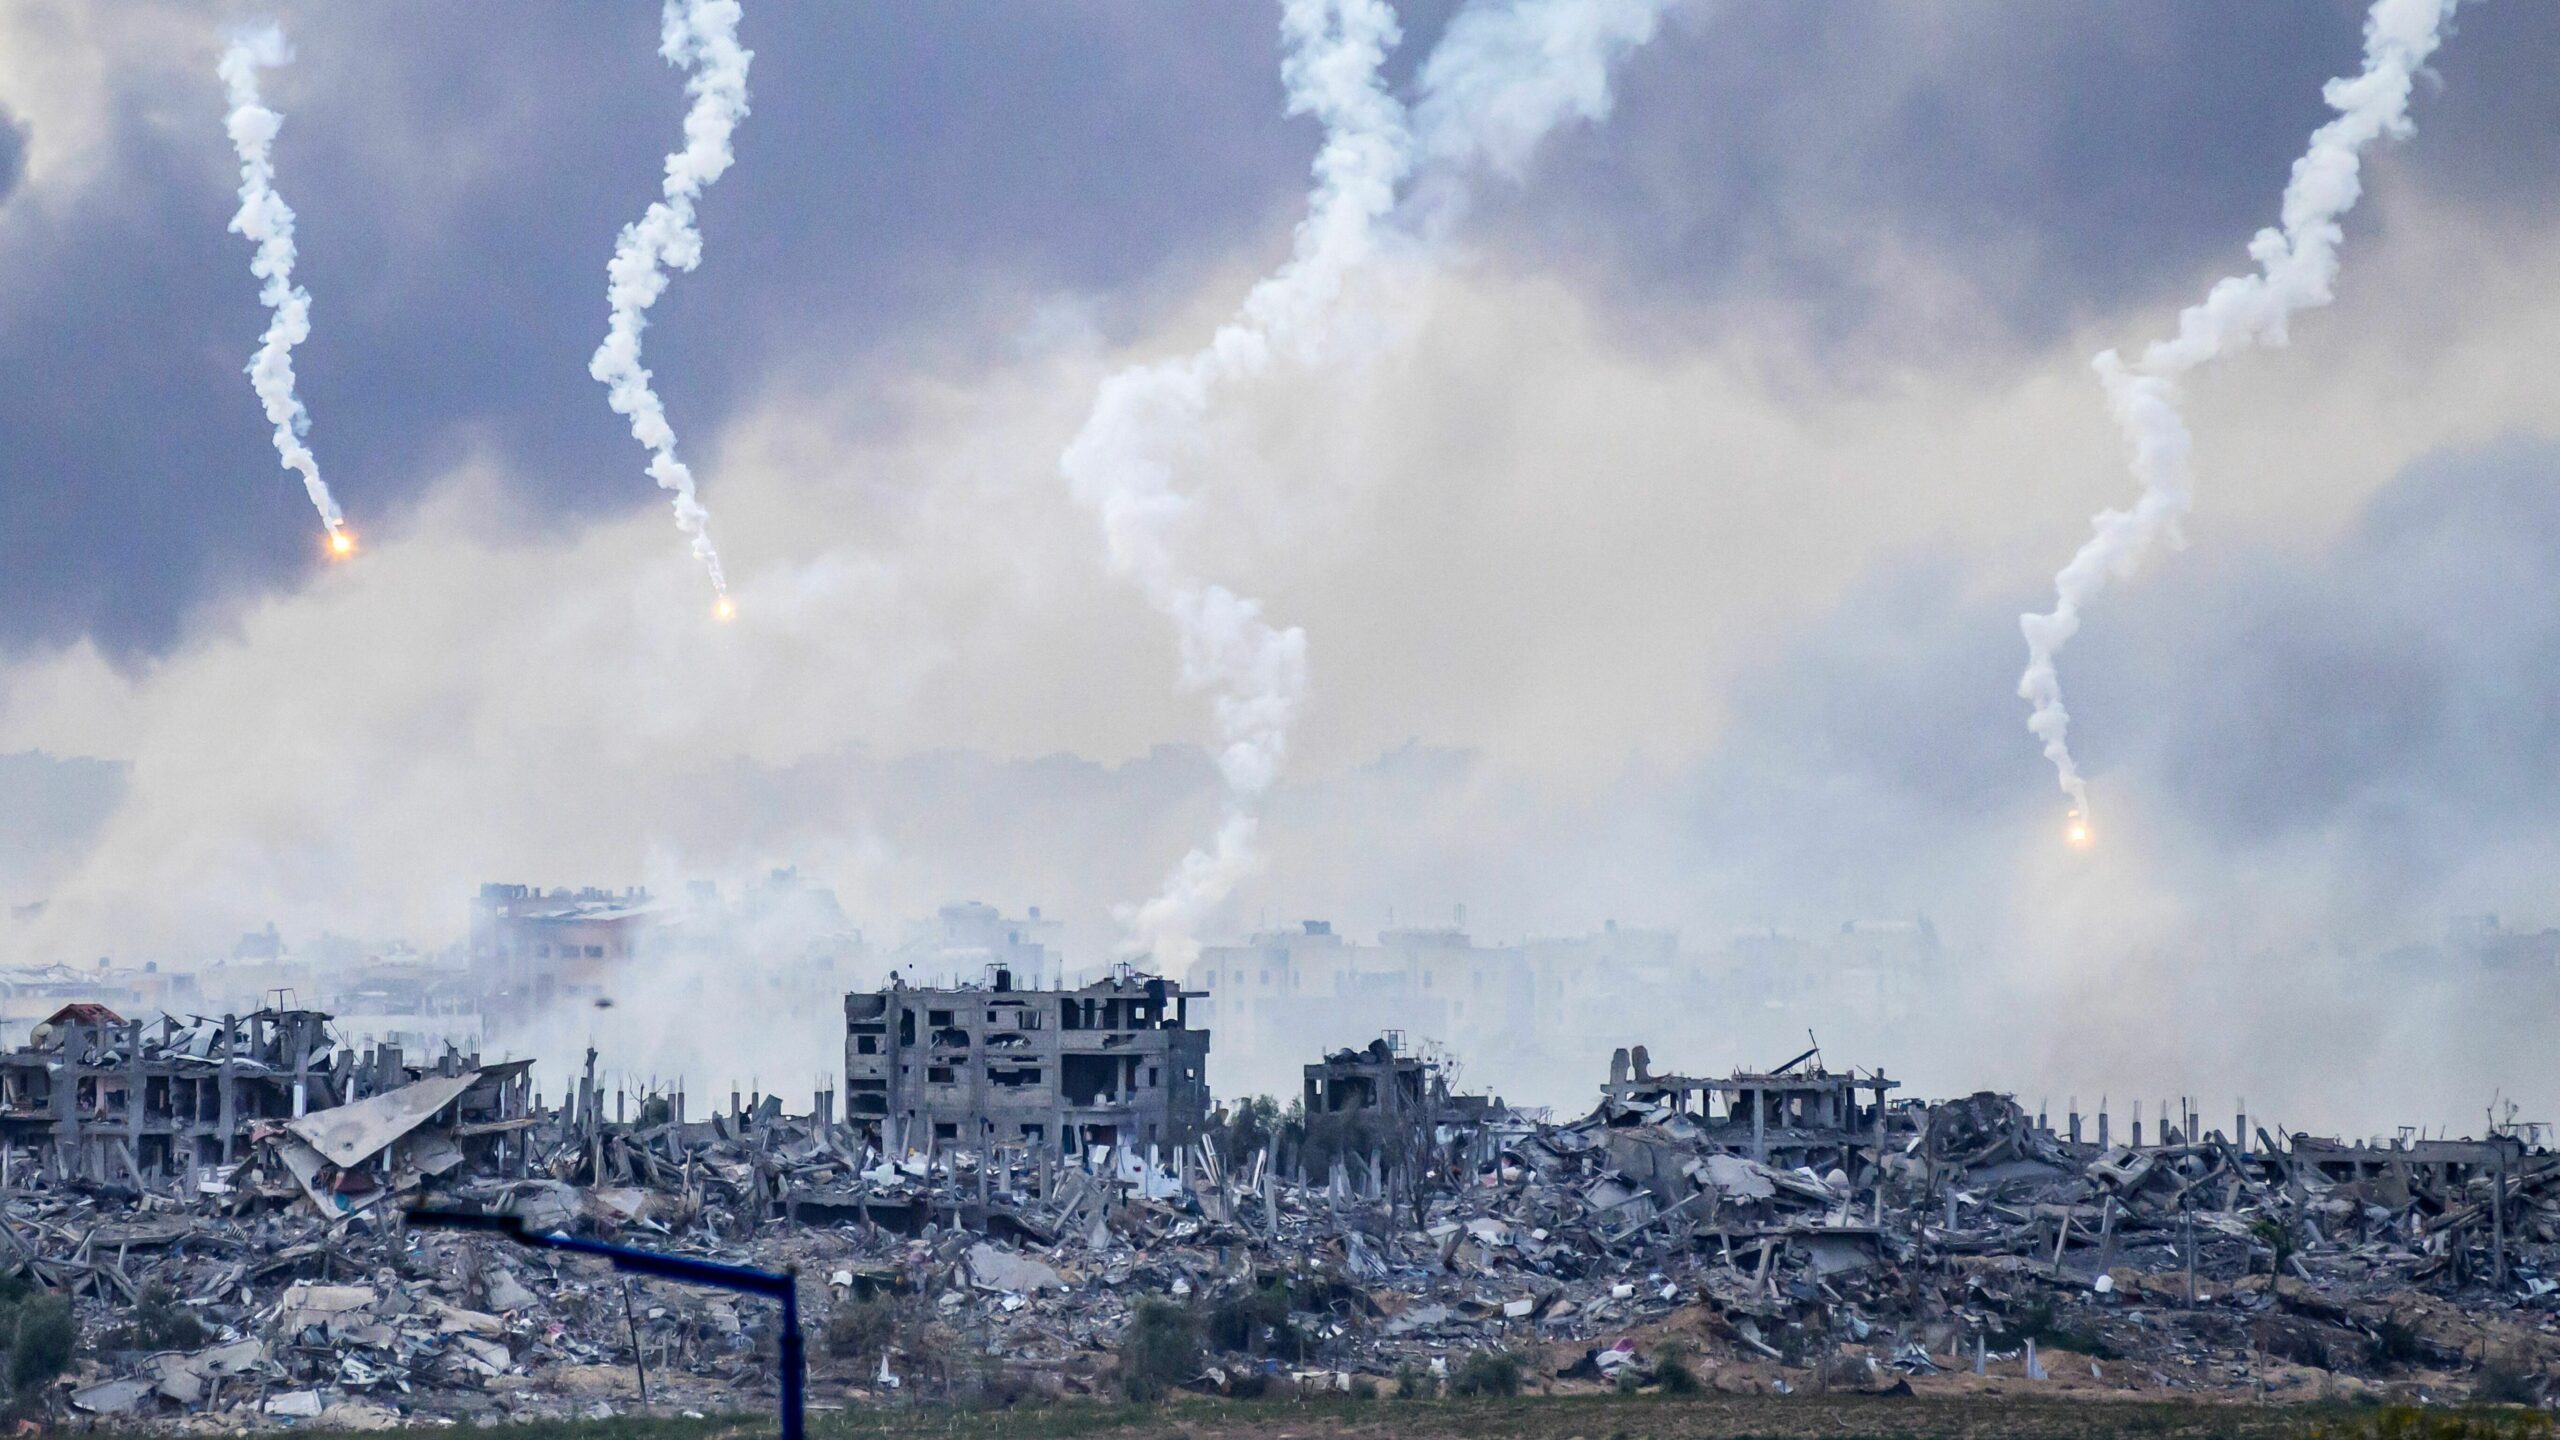 Israel is using an AI system to find targets in Gaza. Experts say it’s just the start